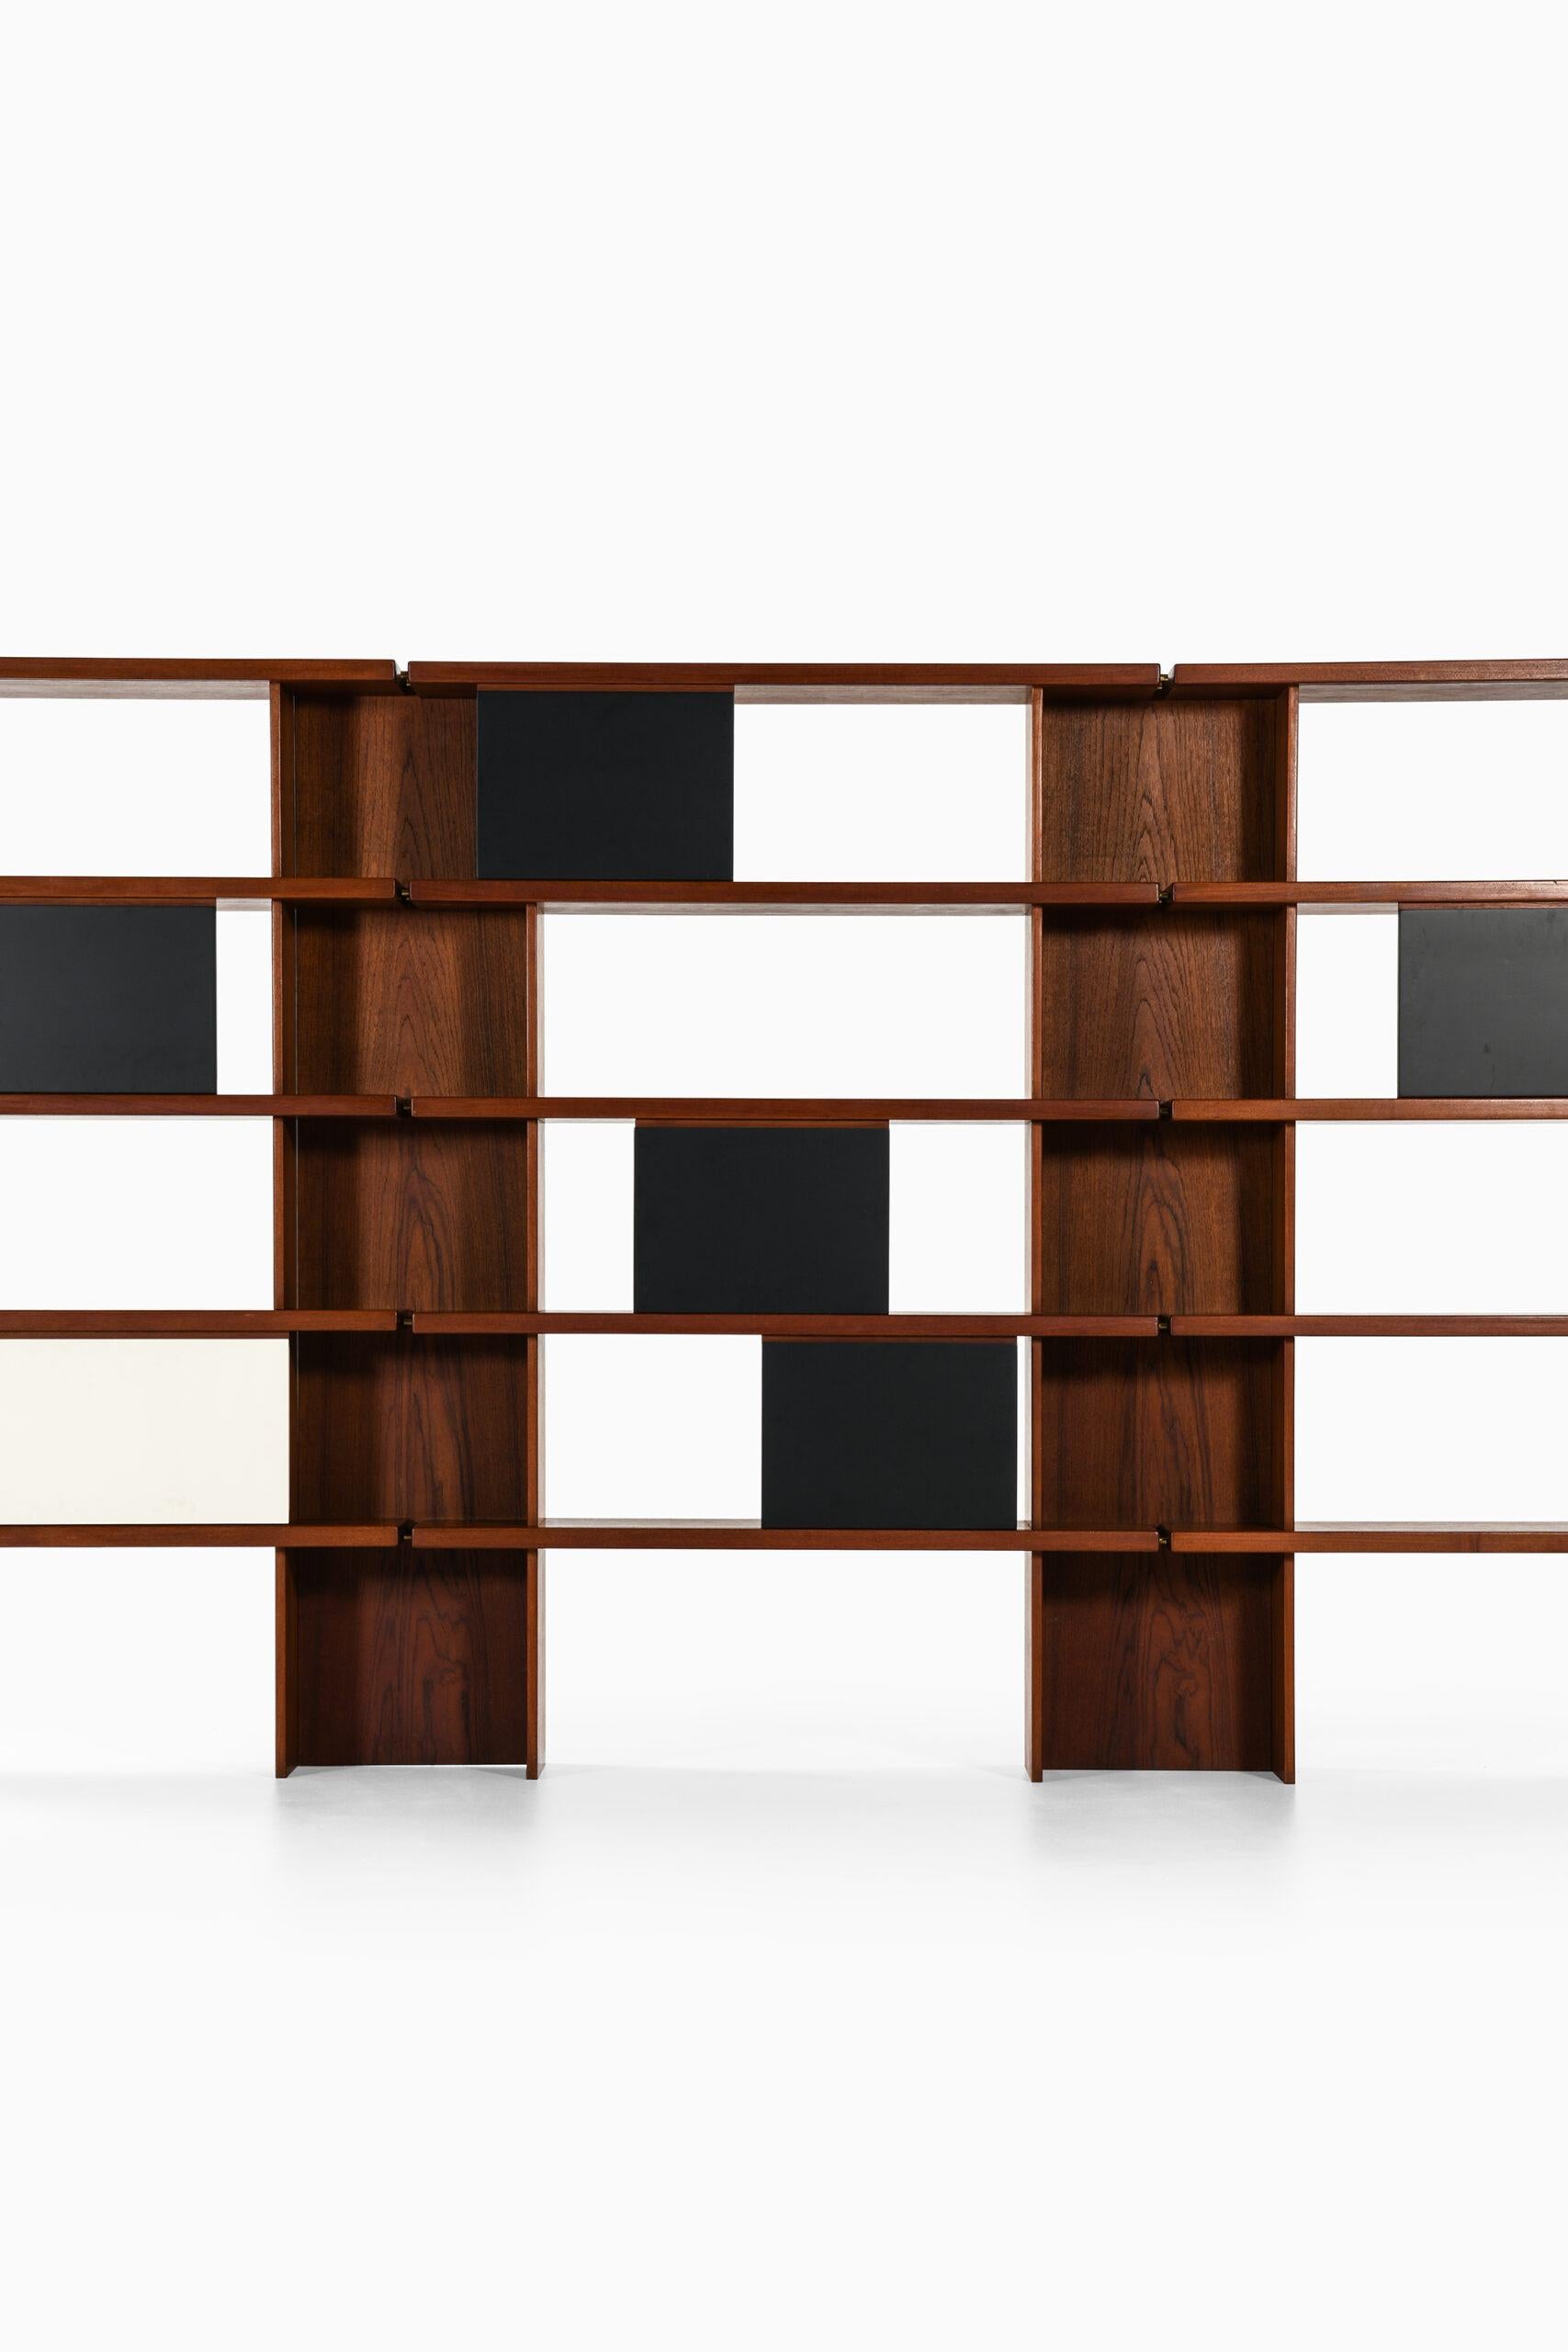 Very rare and large freestanding bookcase designed by Ilmari Tapiovaara. Produced by La Permanente Mobili, Cantù in Italy.